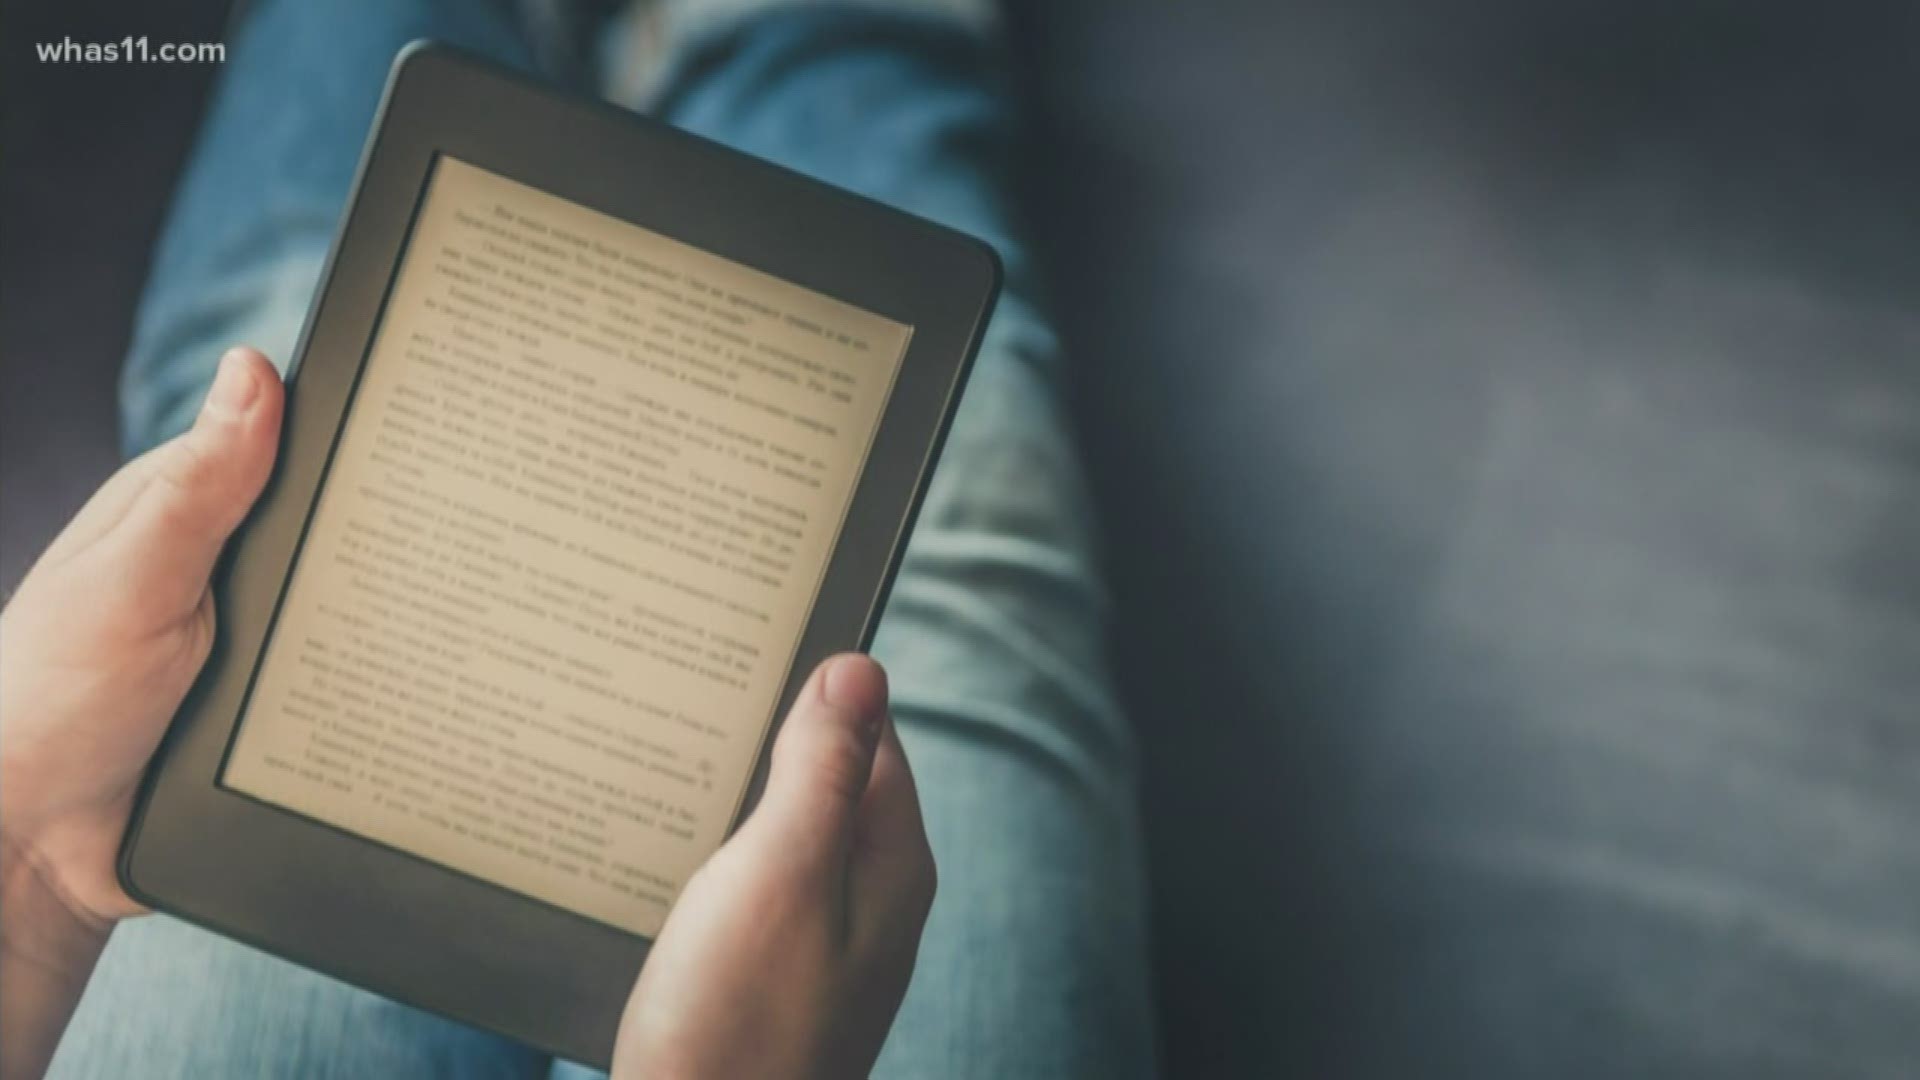 In a study, PEW found that 65 percent of people had read at least one print book last year compared to just 25 percent of people who had read an e-book.